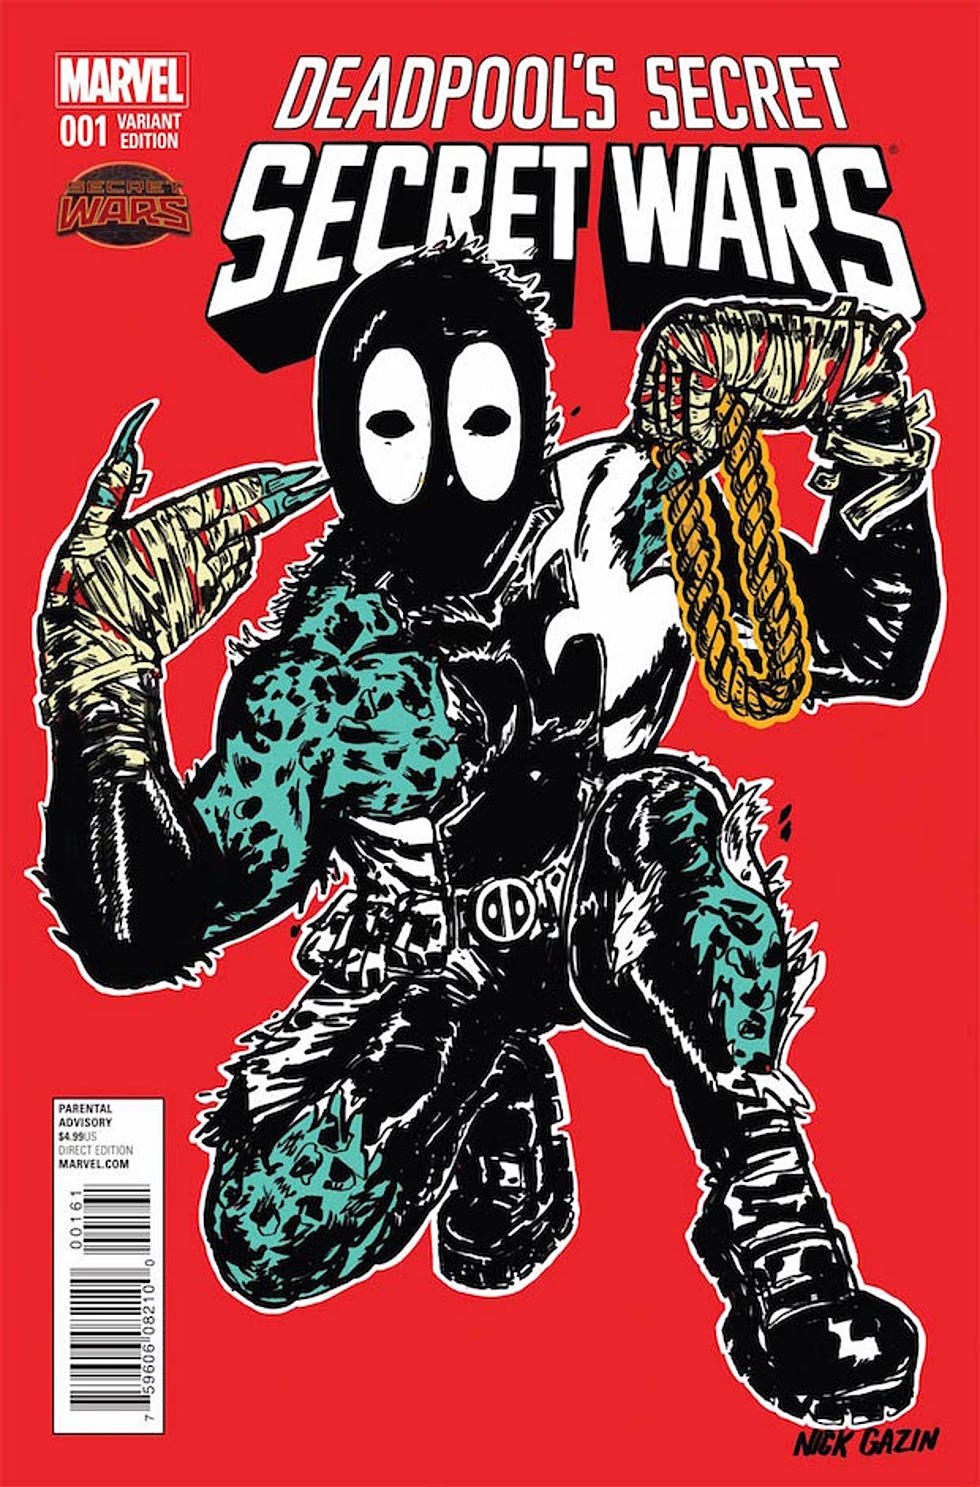 Marvel Makes a New Run The Jewels-Inspired Comic Book Cover